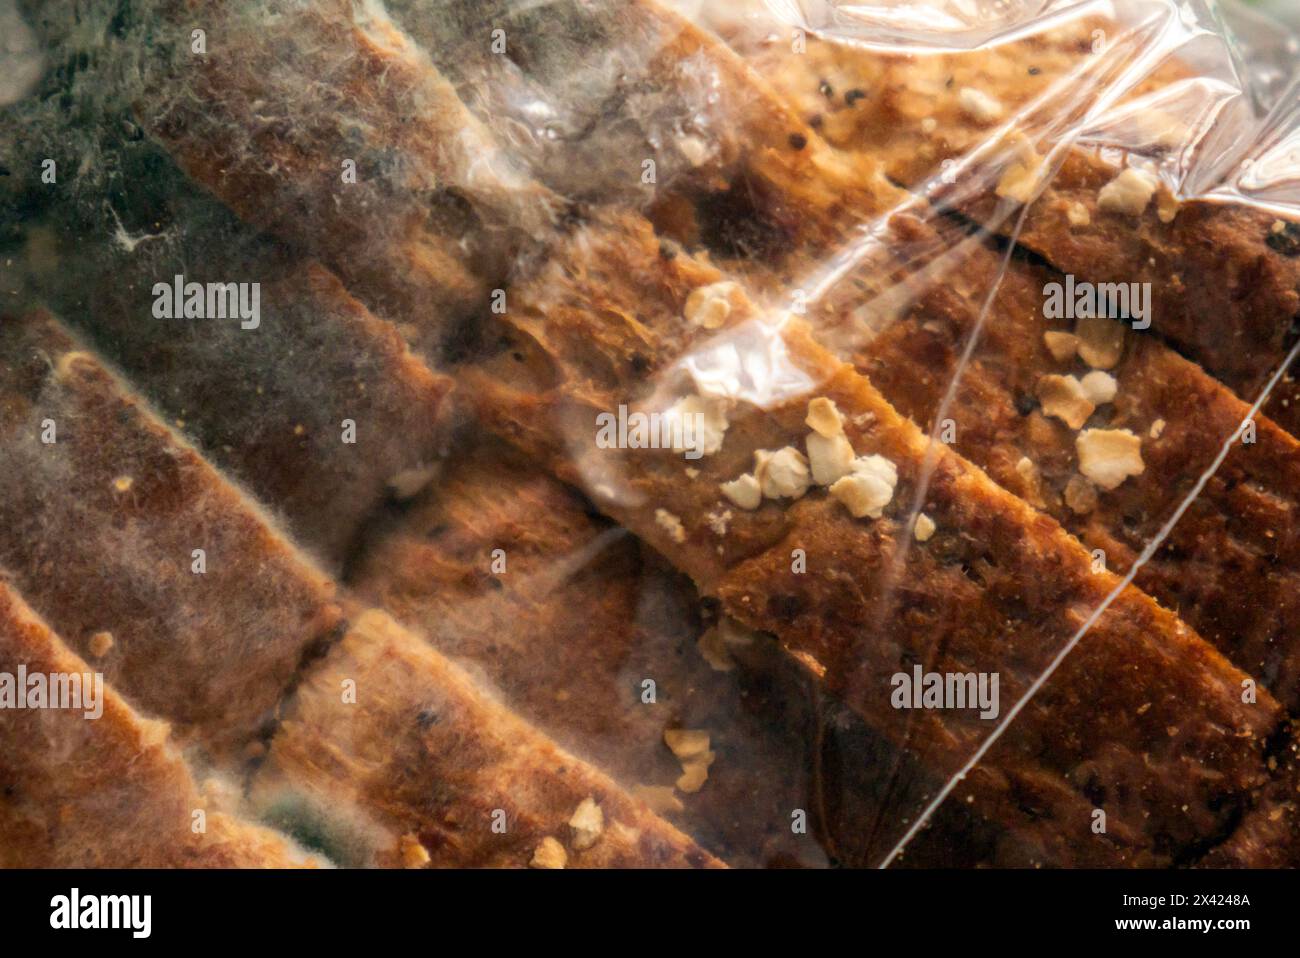 Mouldy bread, bread covered in blue-green mould or mold Stock Photo